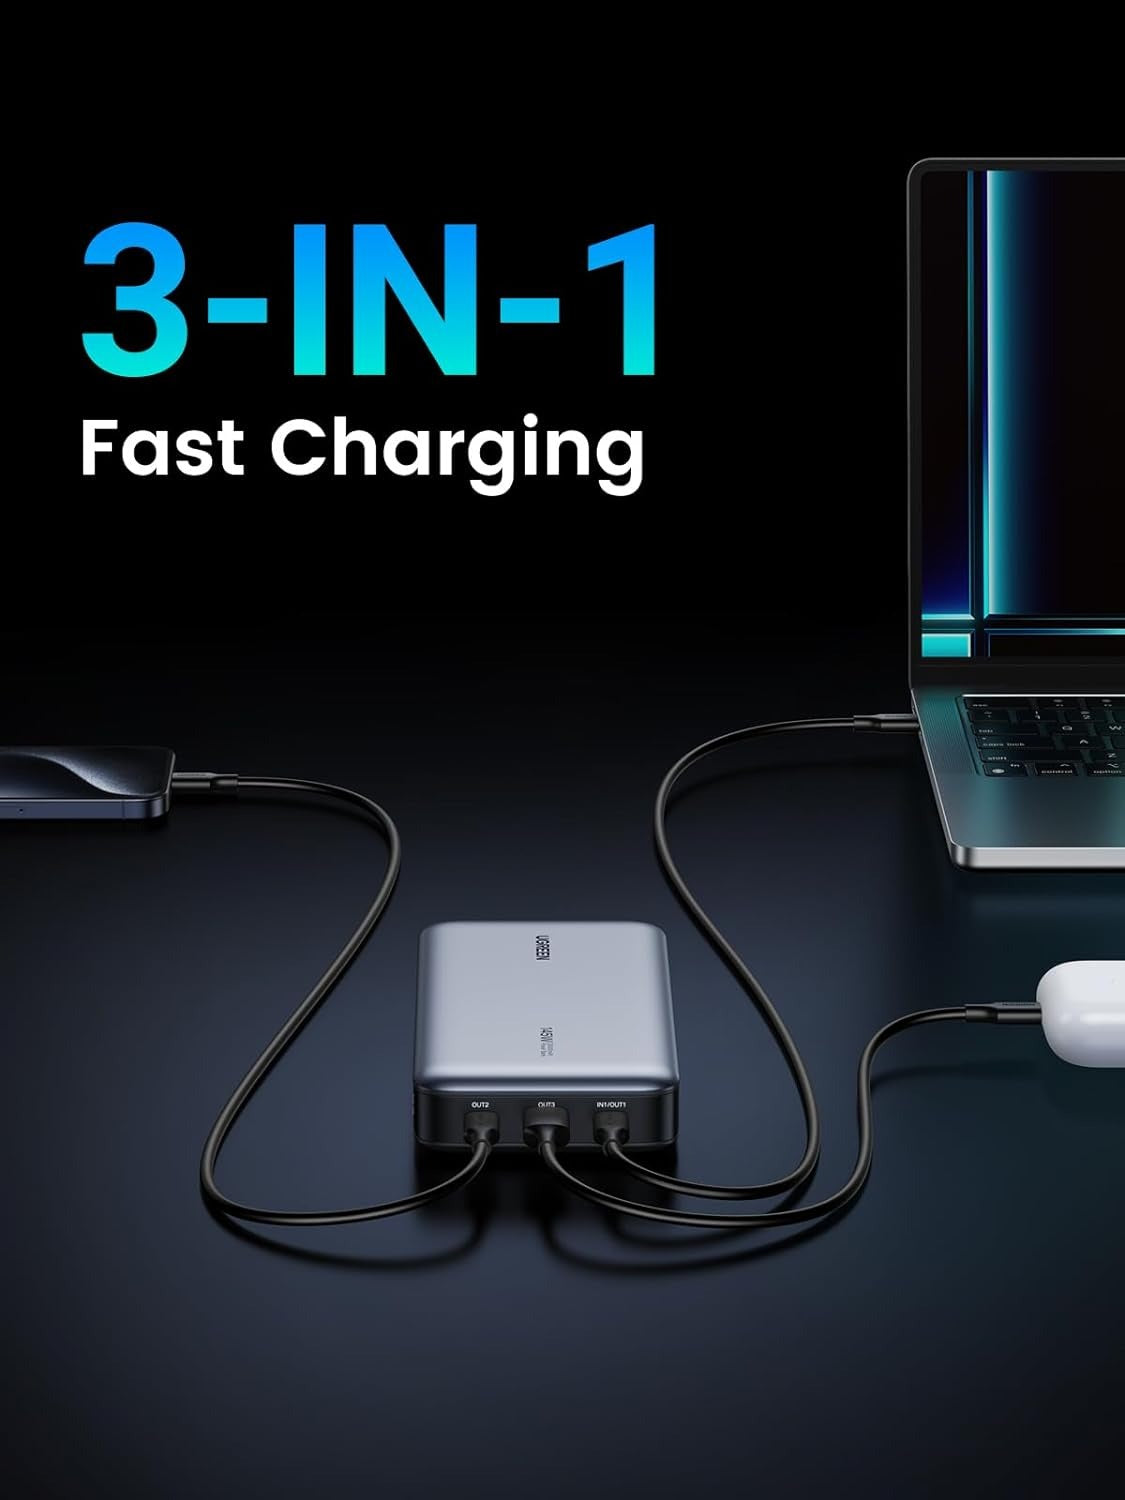 UGREEN 145W 25000mAh 3-in-1 Fast Charging Power Bank with Smart LED Digital Display, 3-Port Output for Smartphone, Laptop, Tablet, MacBook, Dell XPS, iPad, iPhone, Galaxy, Switch, DJI, Steam Deck | 90597A